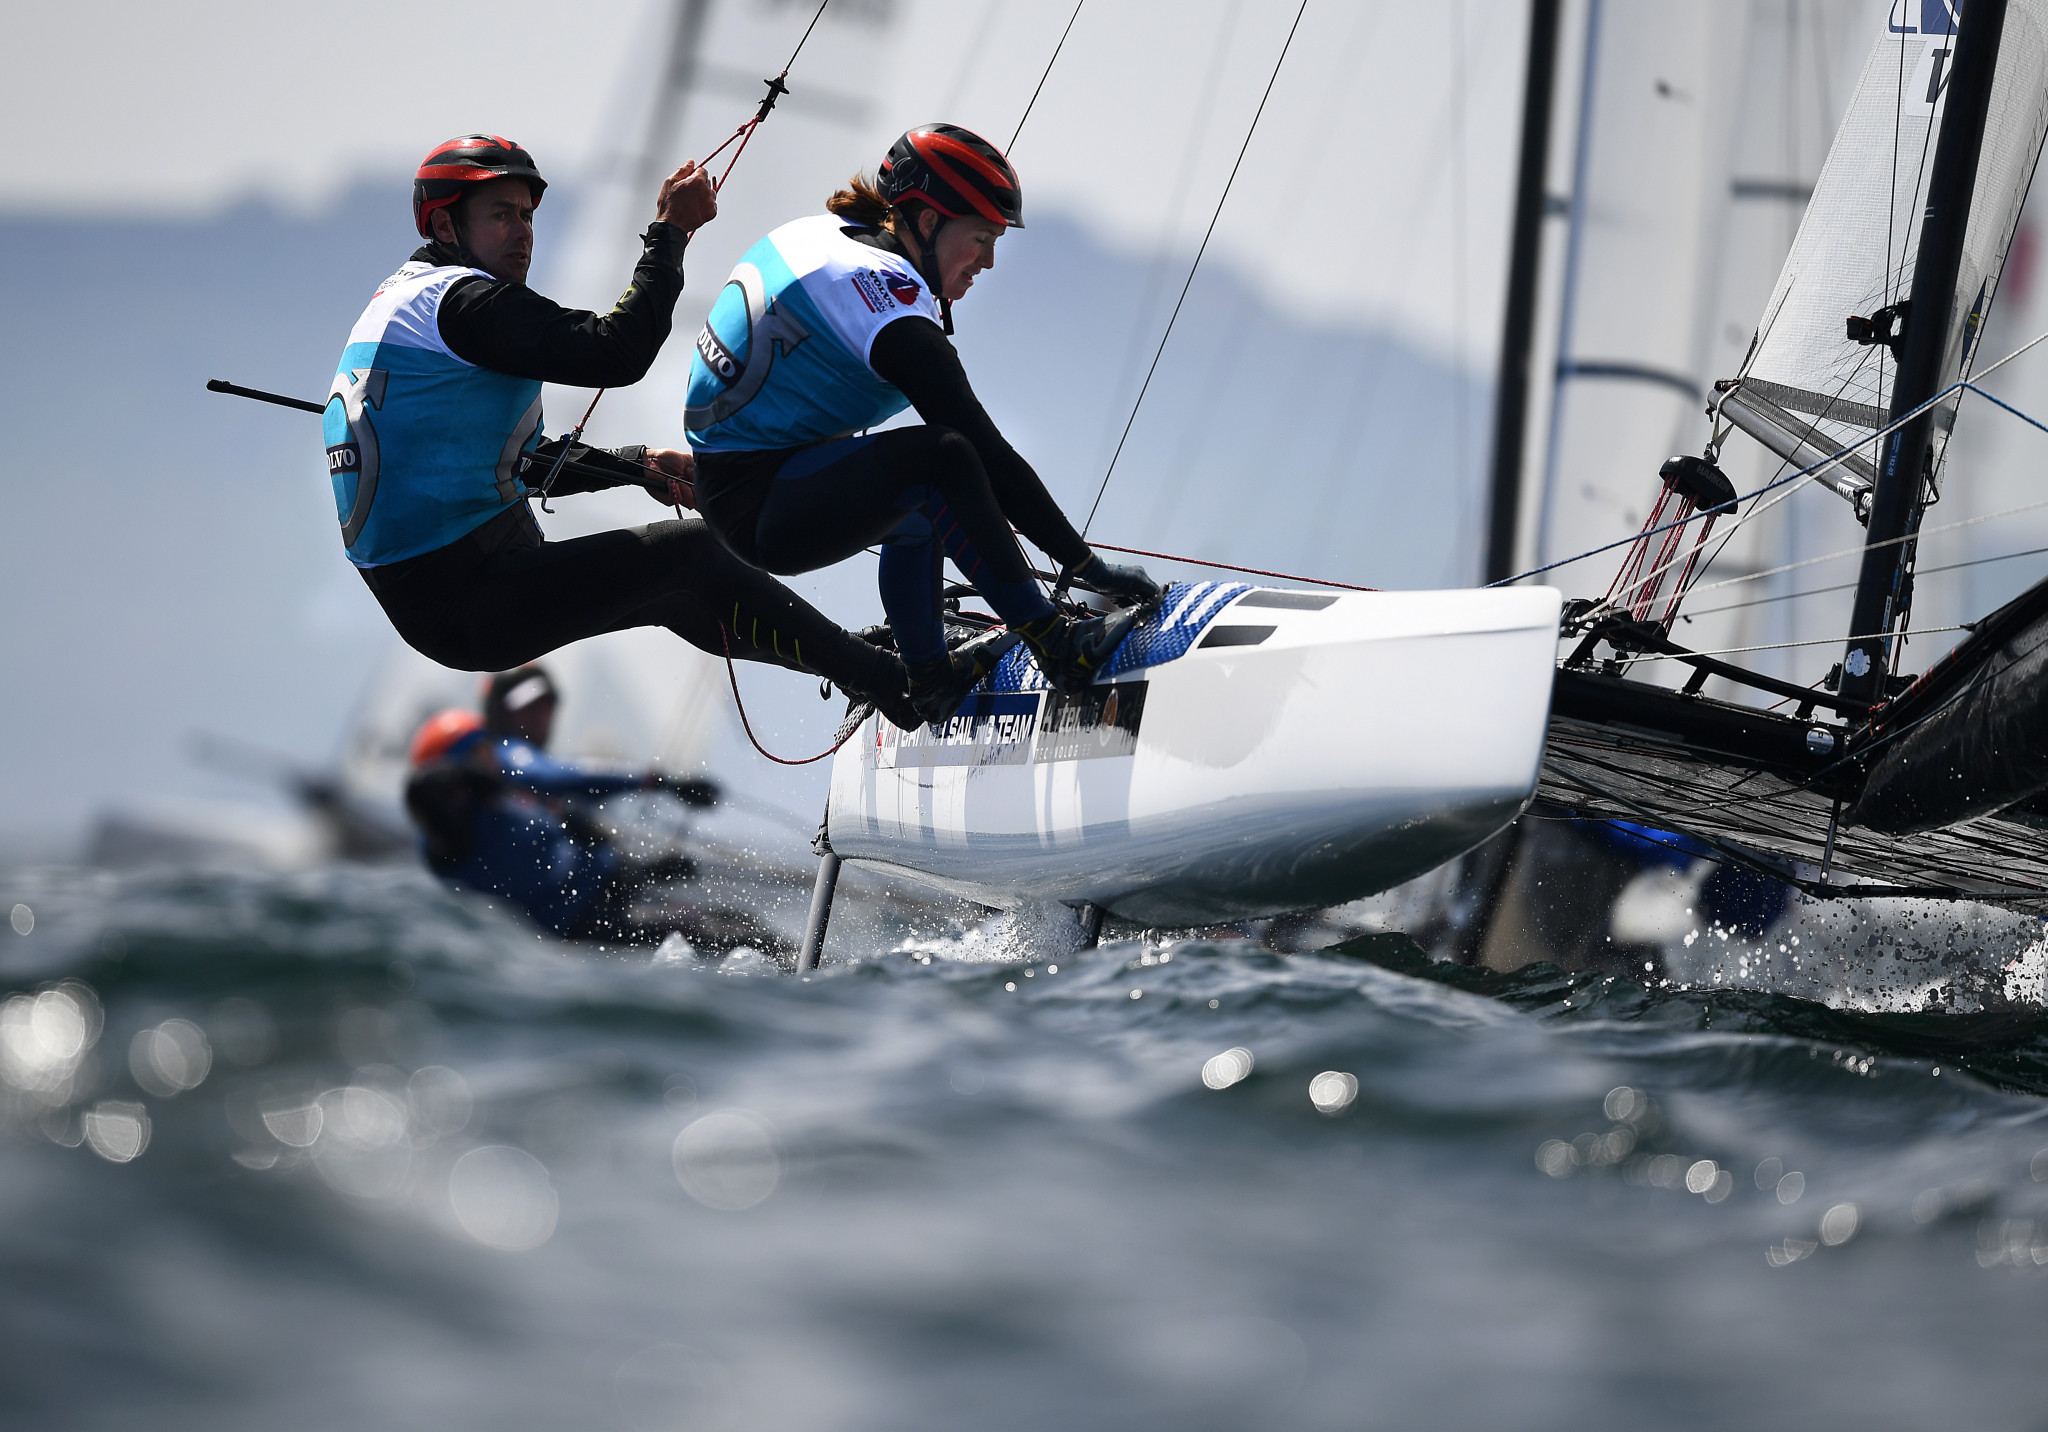 The European Championship will accommodate the 49er, 49erFX and Nacra 17 classes ©Getty Images